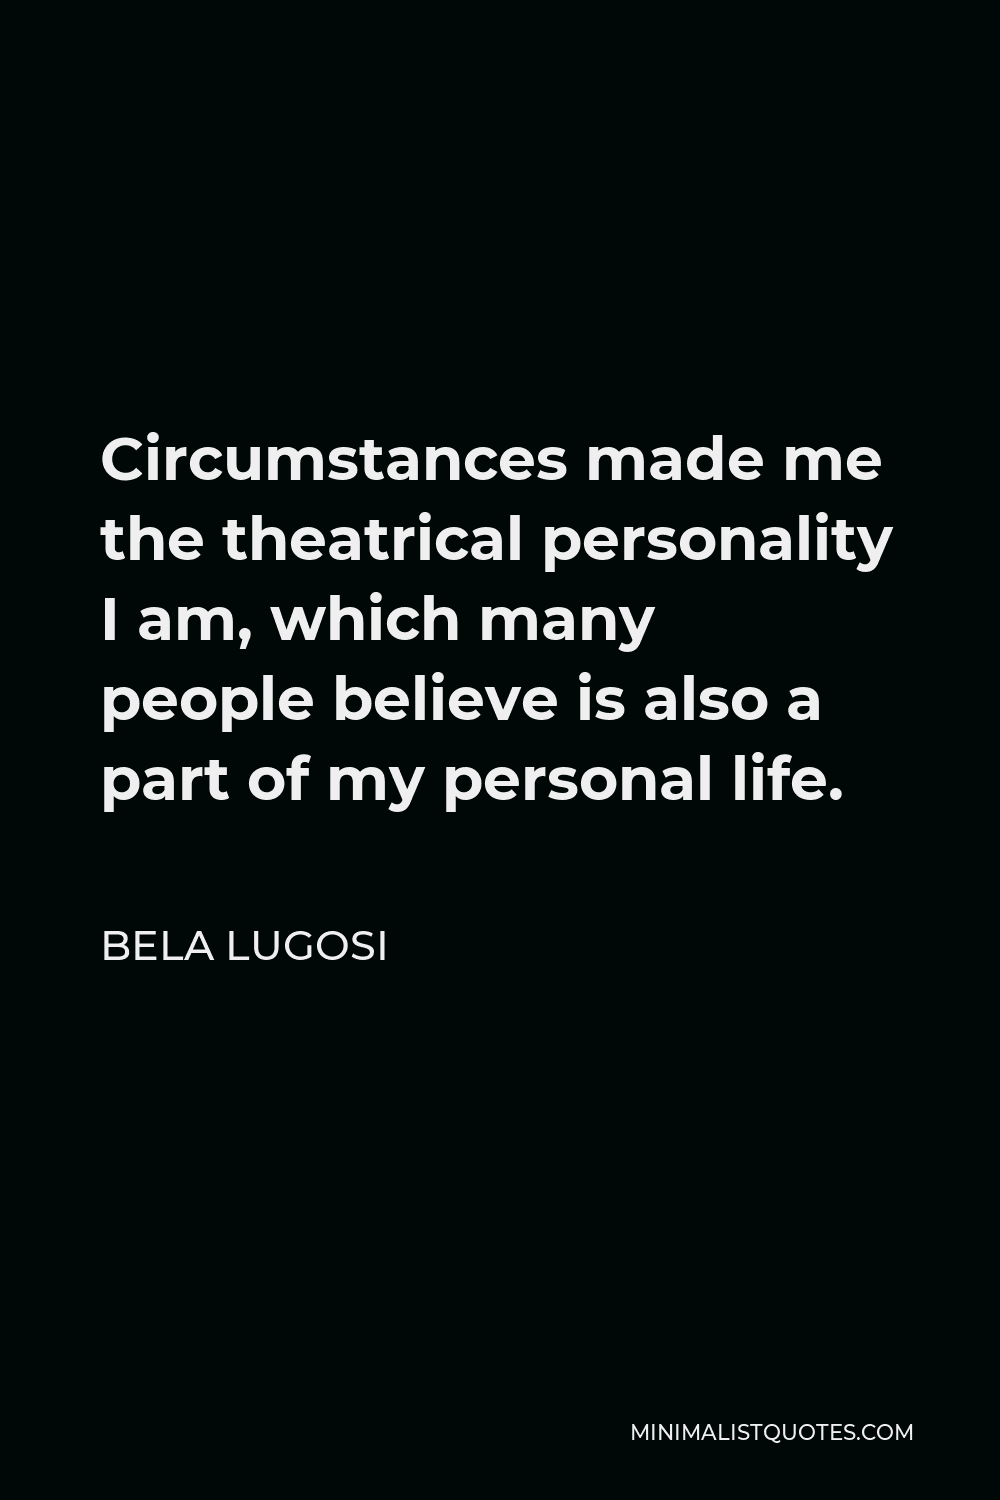 Bela Lugosi Quote - Circumstances made me the theatrical personality I am, which many people believe is also a part of my personal life.